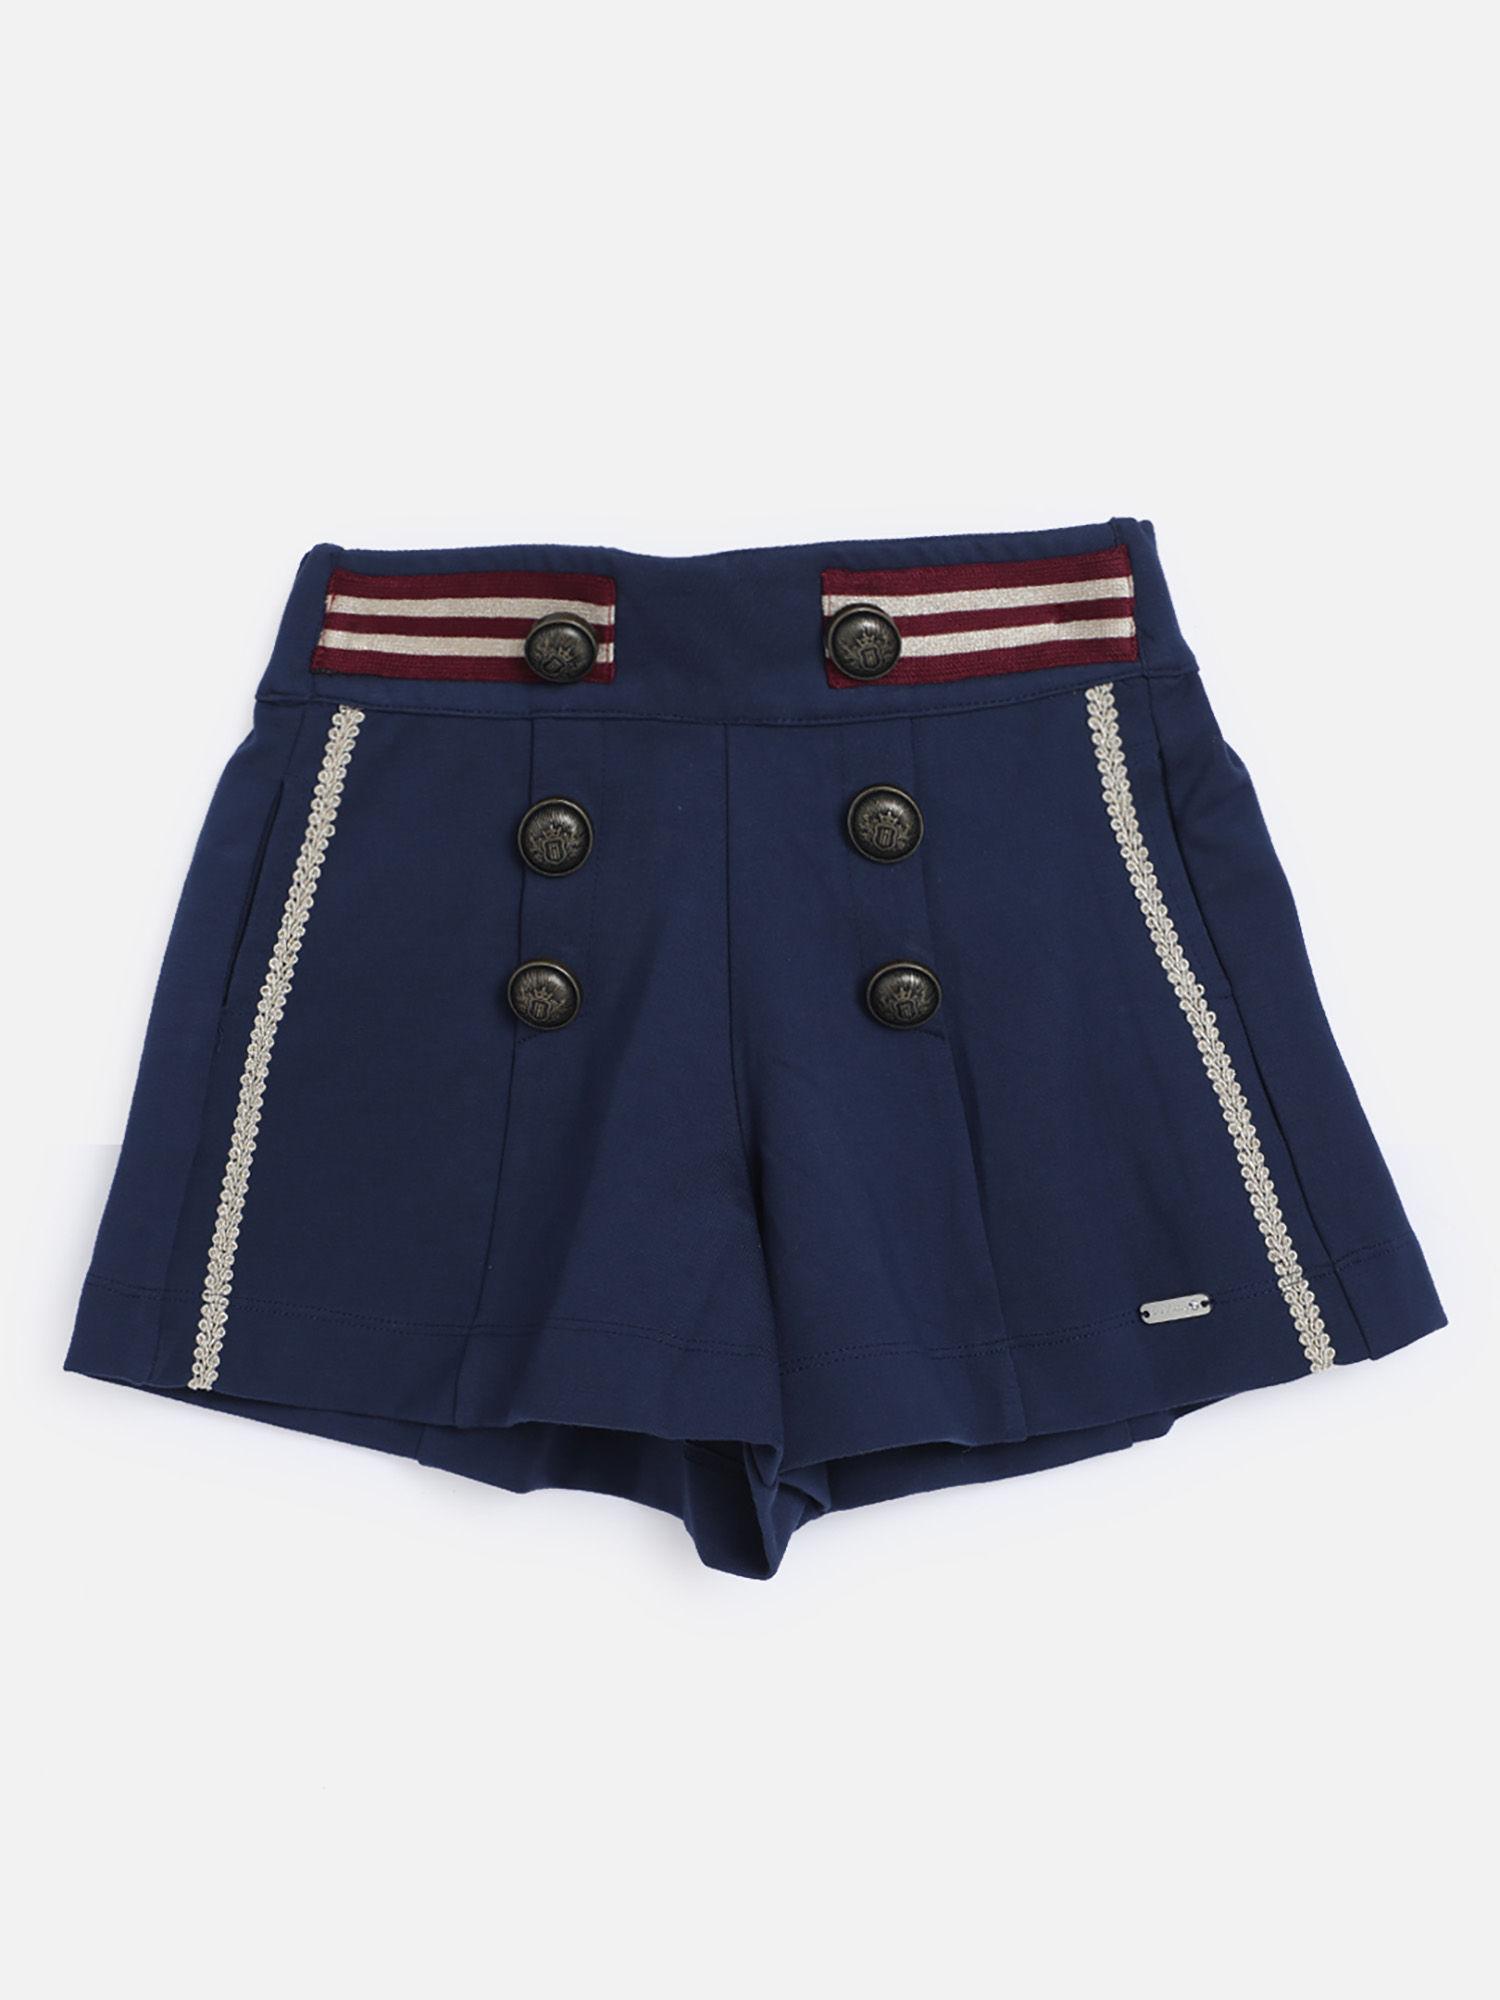 Fashion Casual Girls Polyester Solid Navy Blue Short